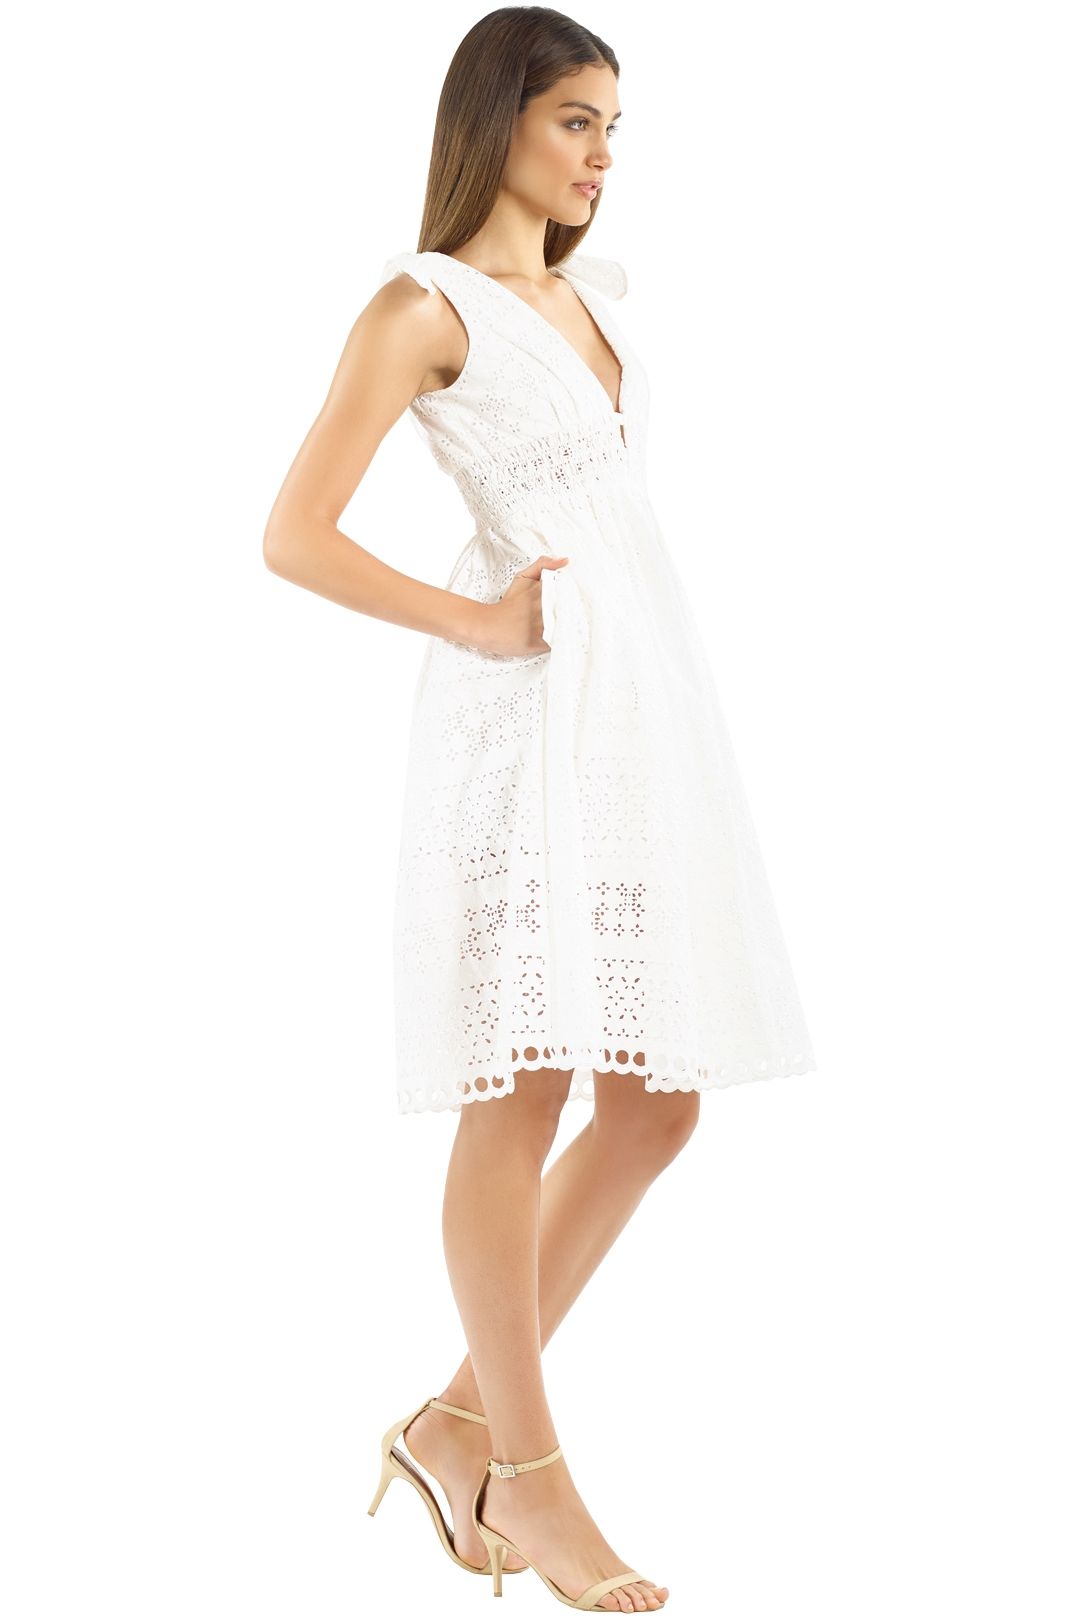 Broderie Anglaise Dress in White by Self Portrait for Rent